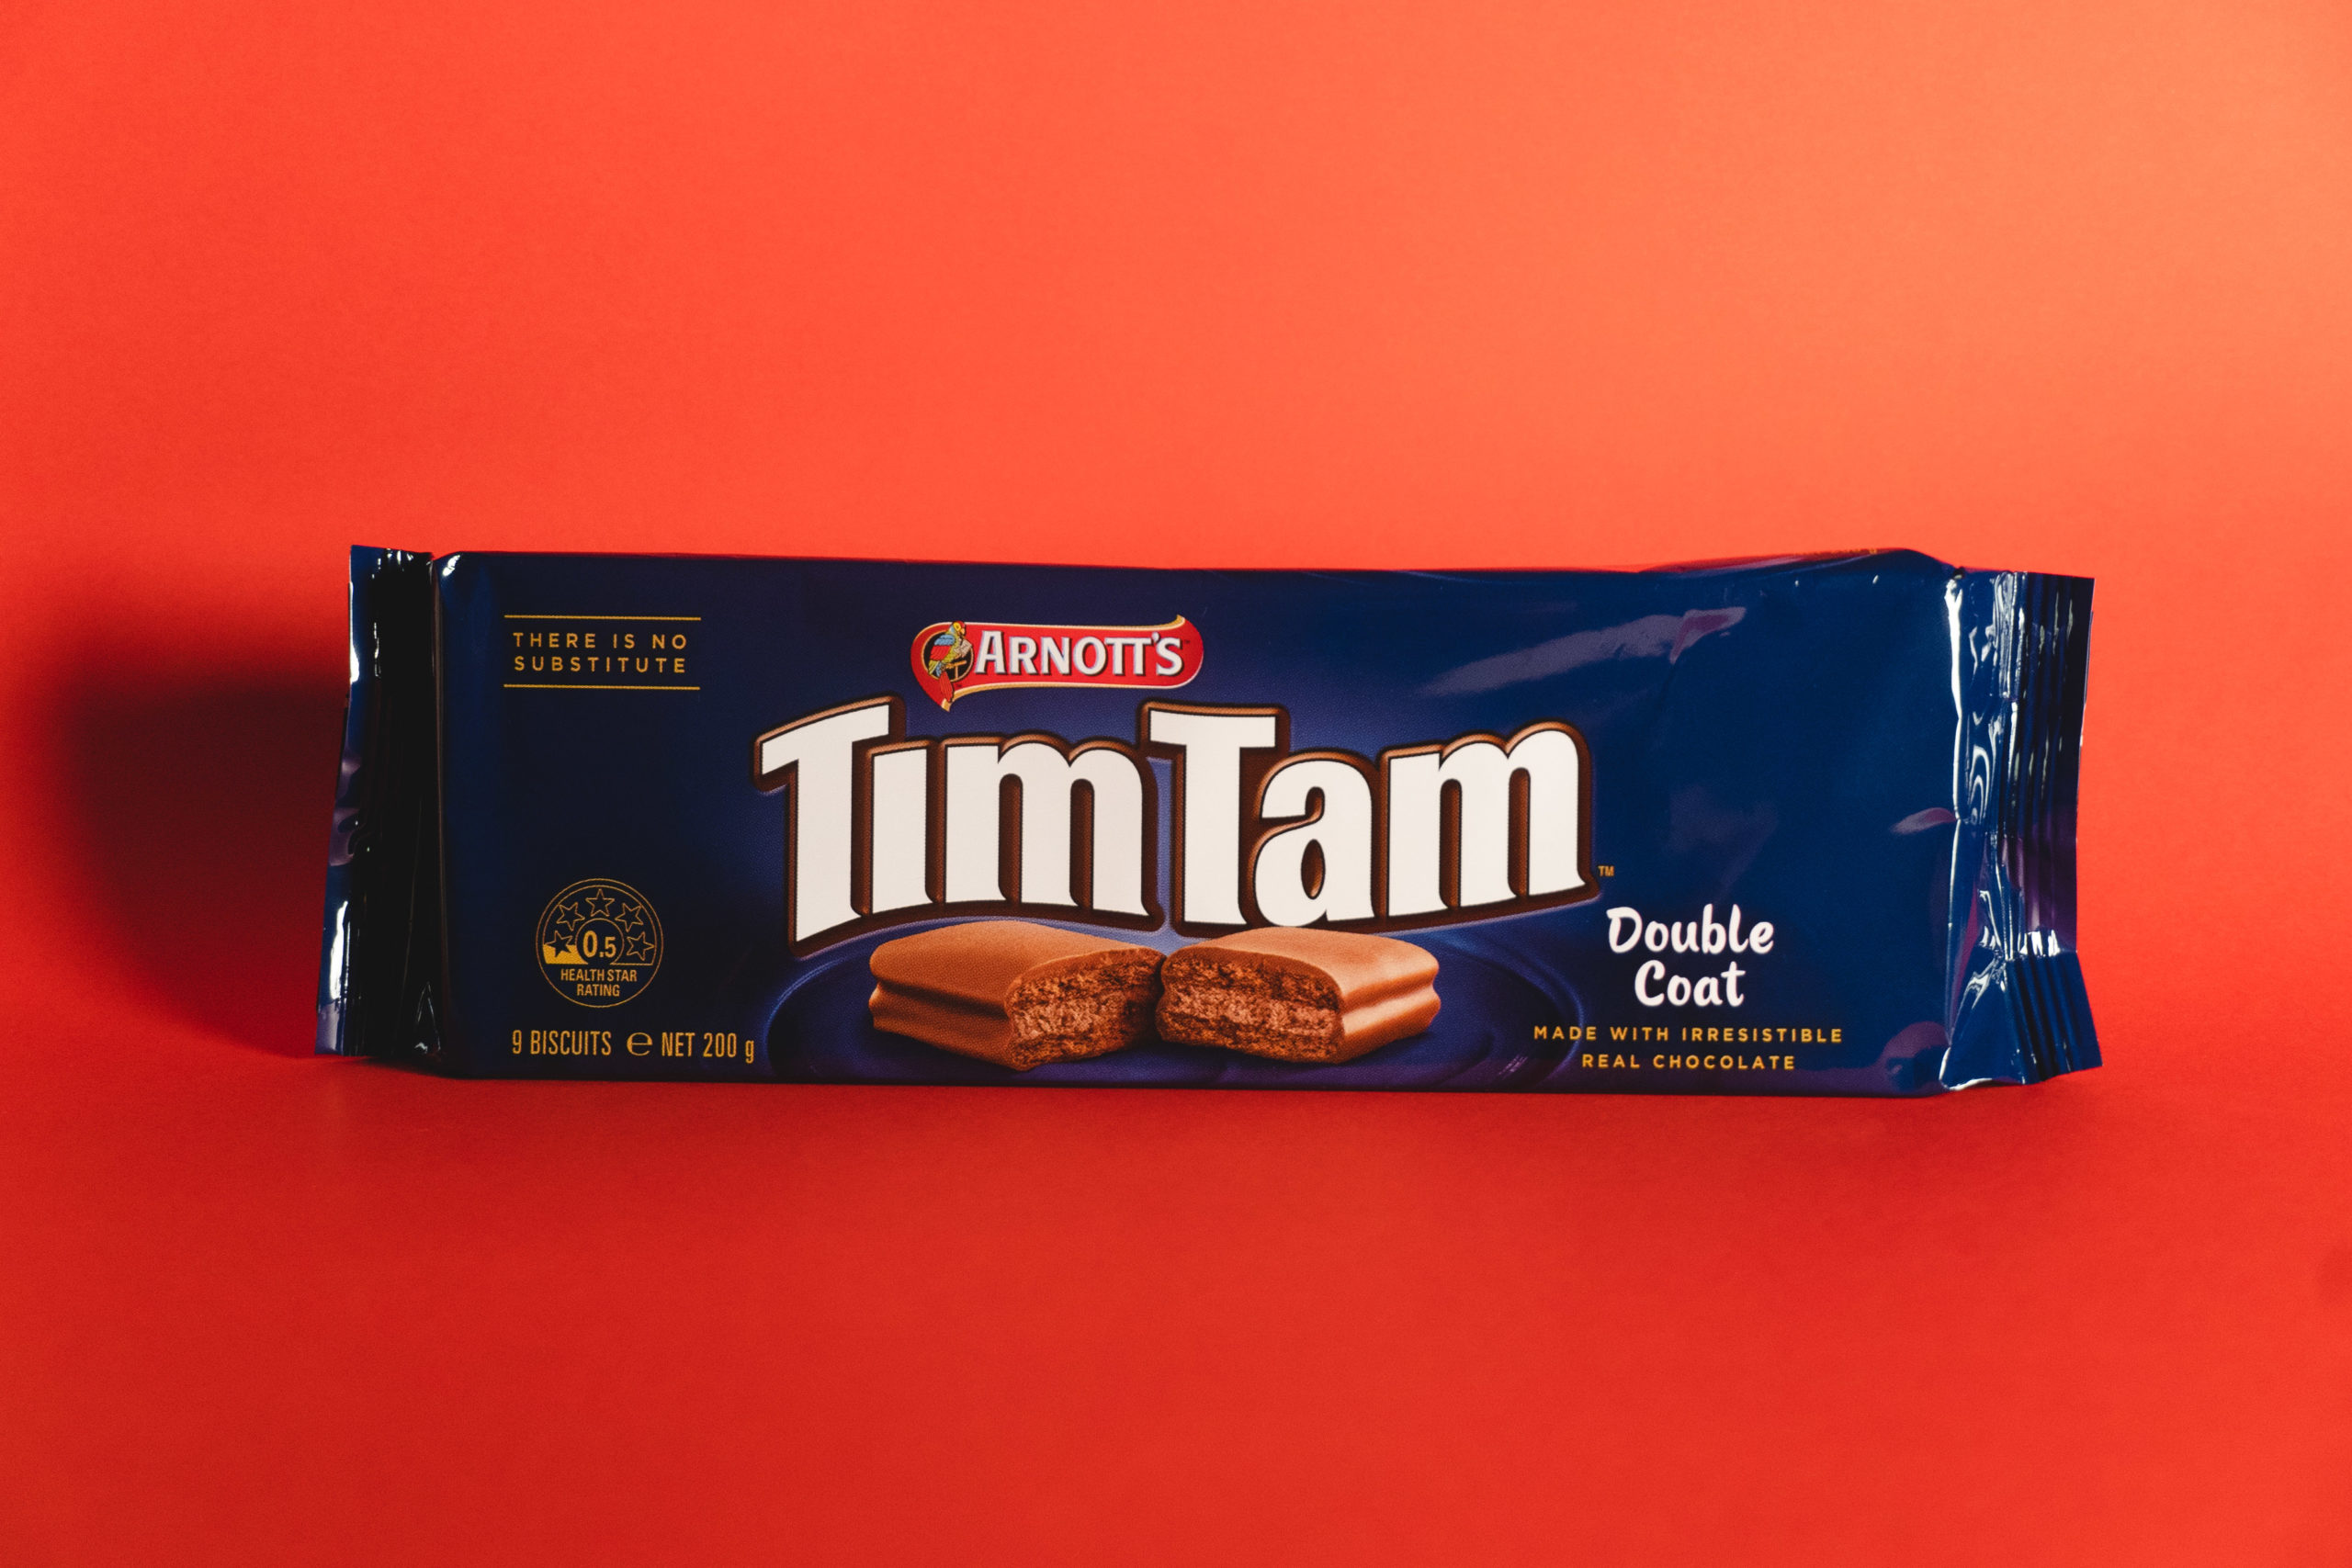 Introducing our newest flavour, Tim Tam VEGEMITE! Two iconic